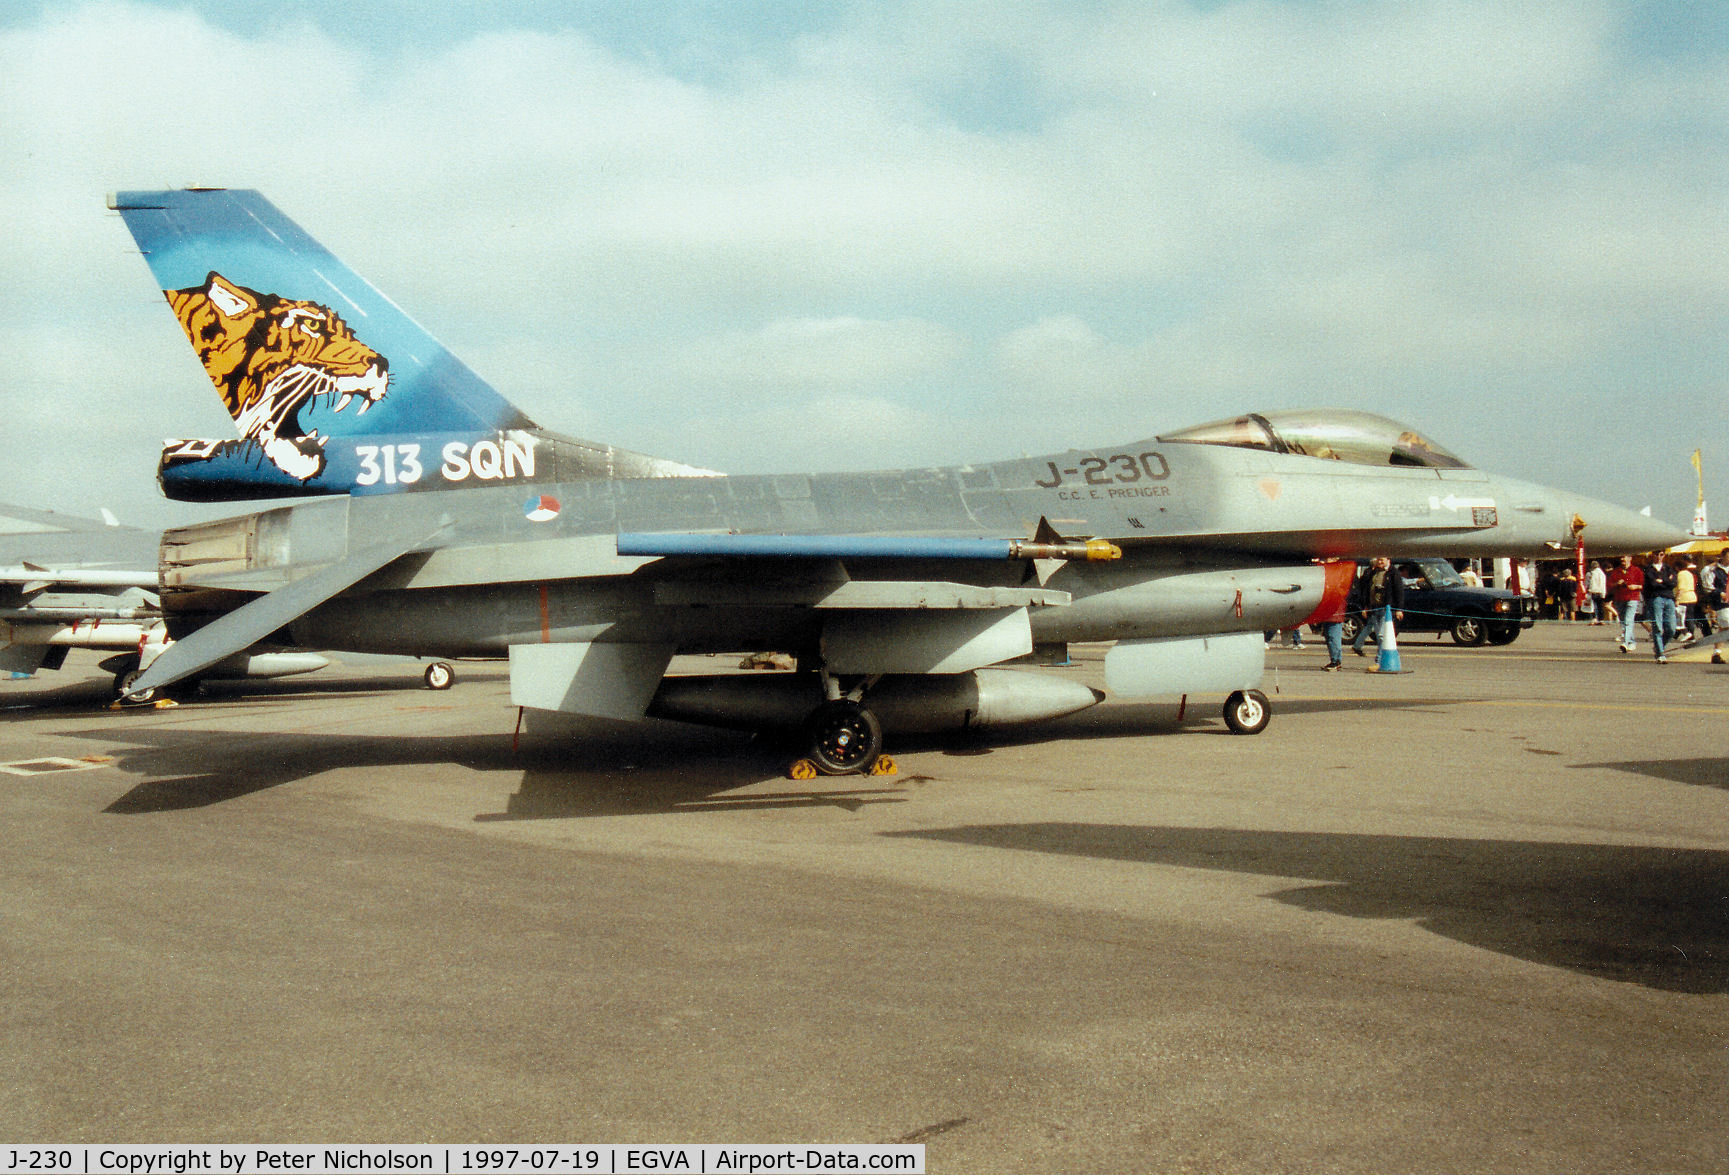 J-230, 1978 Fokker F-16A Fighting Falcon C/N 6D-19, F-16A Falcon, callsign Tiger 81, of 313 Squadron Royal Netherlands Air Force on display at the 1997 Intnl Air Tattoo at RAF Fairford.